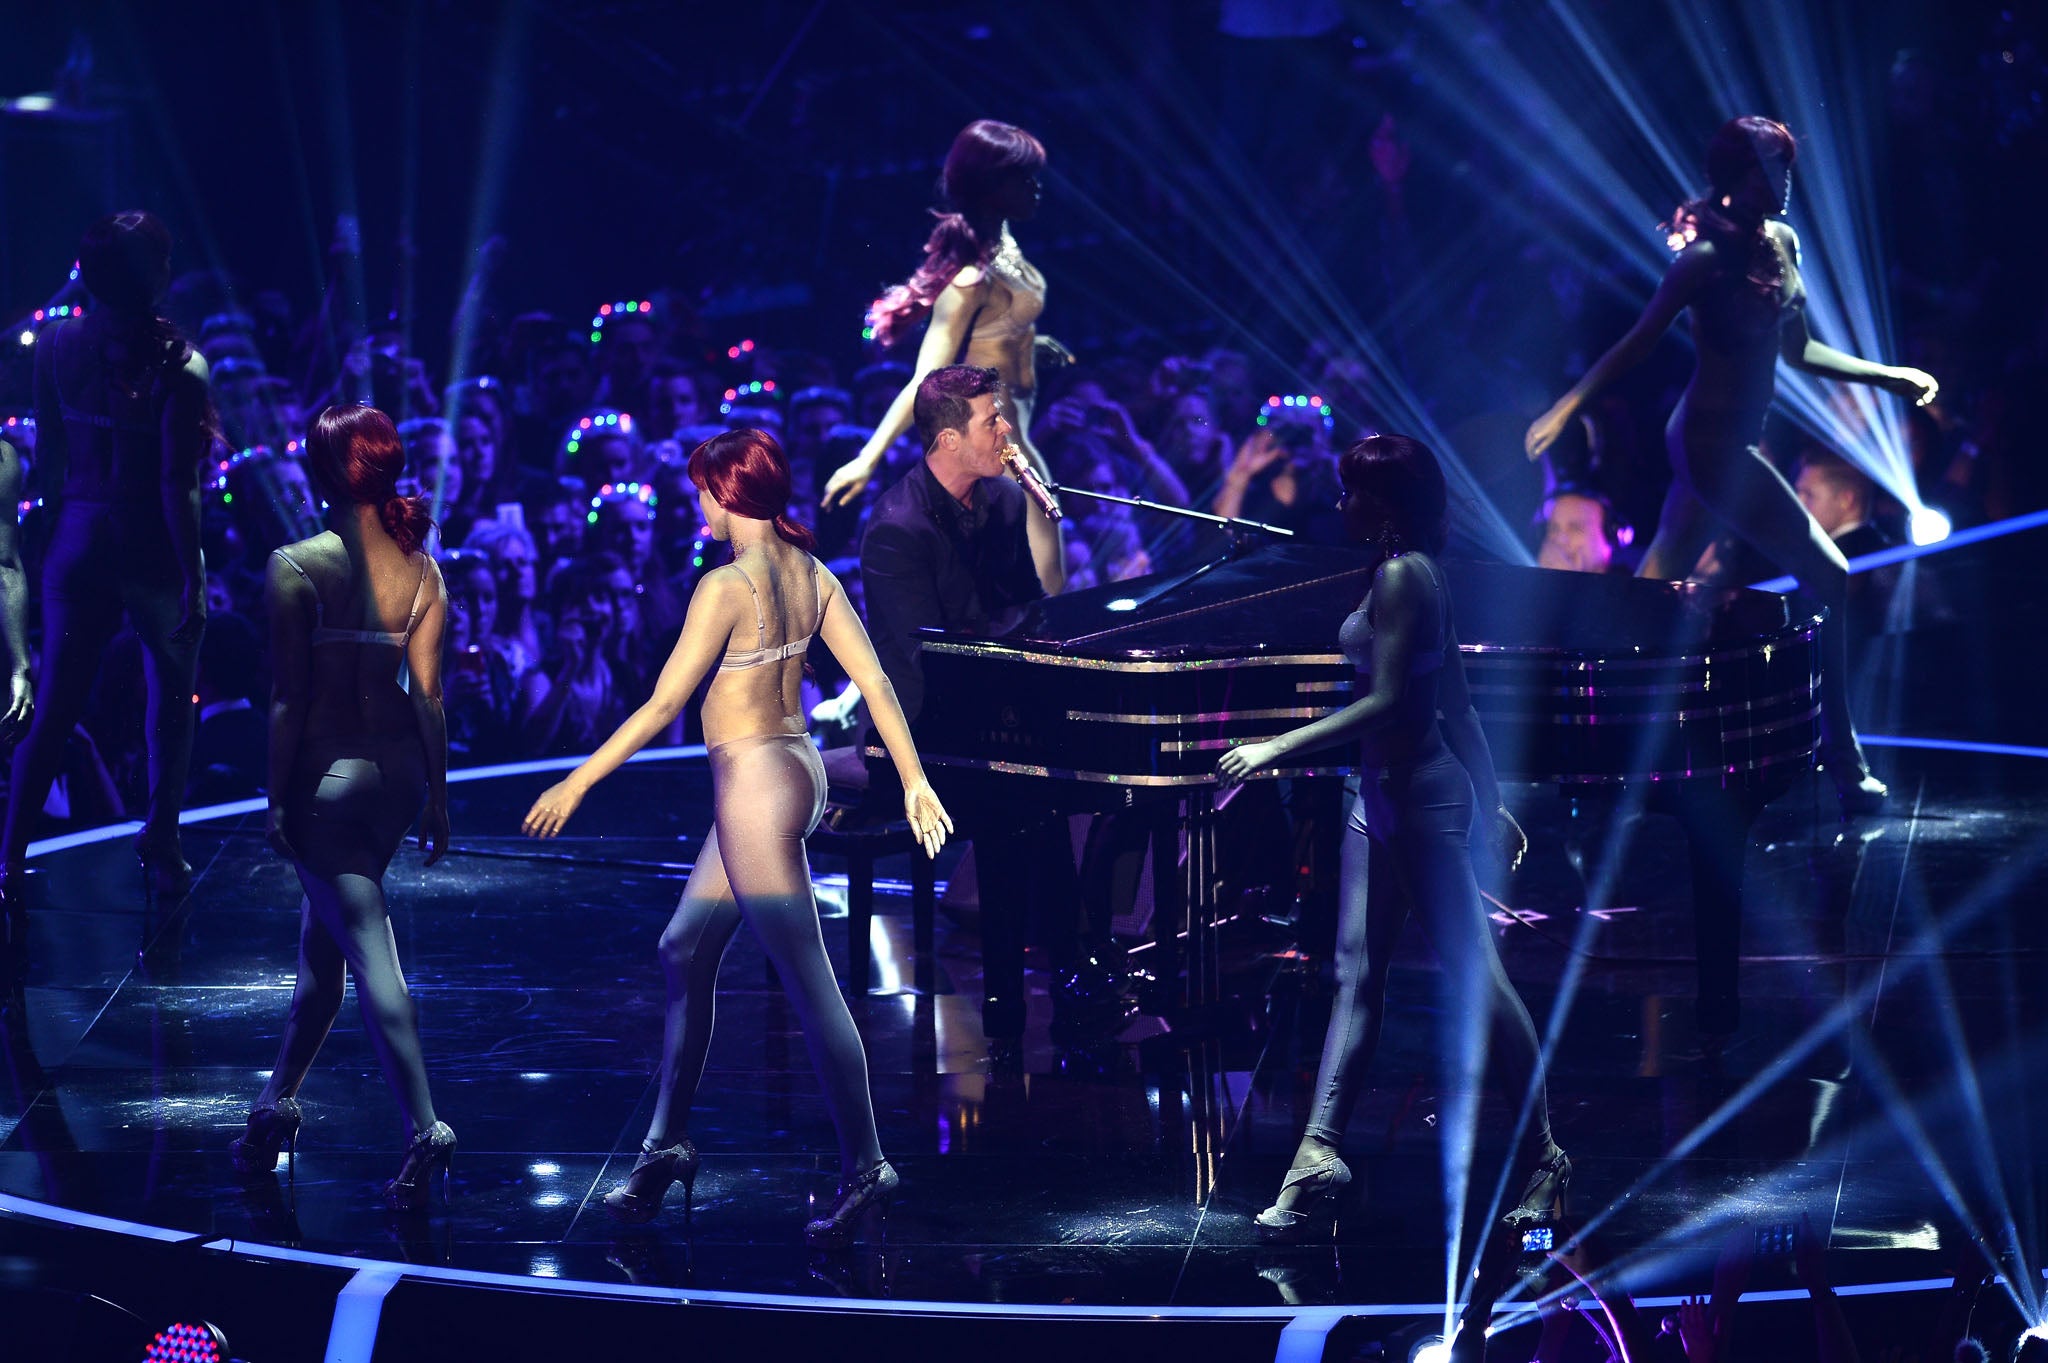 Rob Thicke performs 'Blurred Lines' on stage at the MTV EMAs